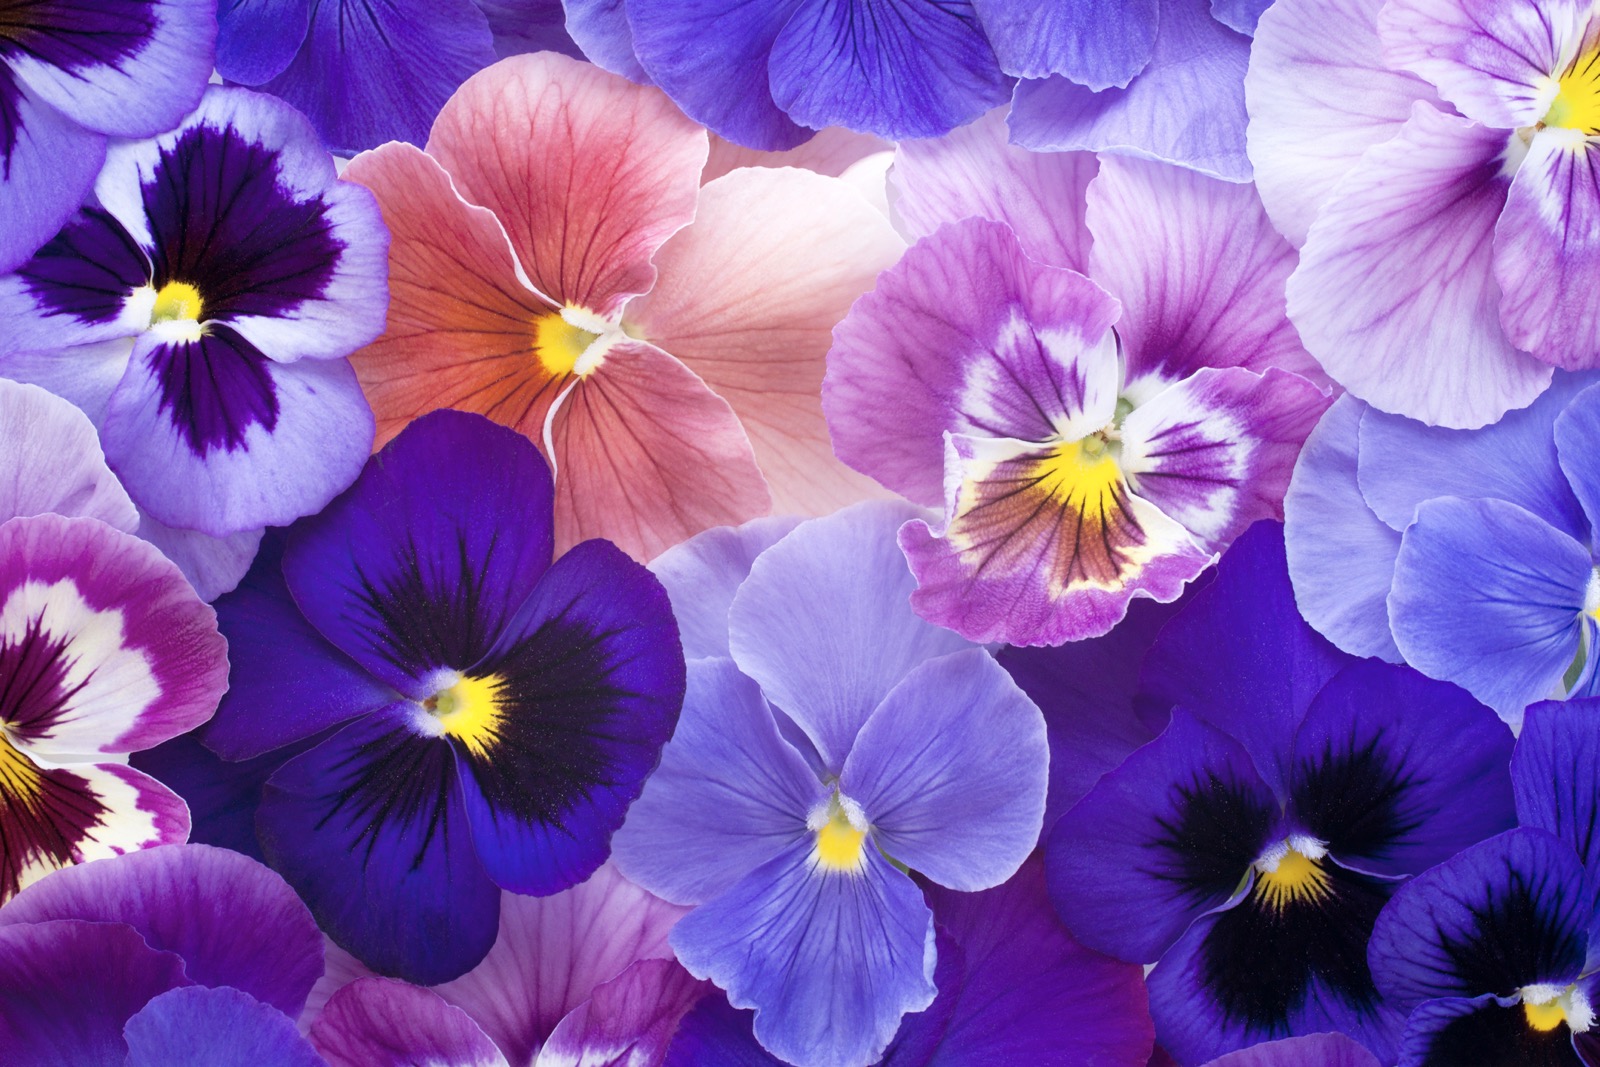 You got: Cheerful Pansy! What Spring Flower Are You? 🌷 Eat a Spring-Colored Buffet to Find Out